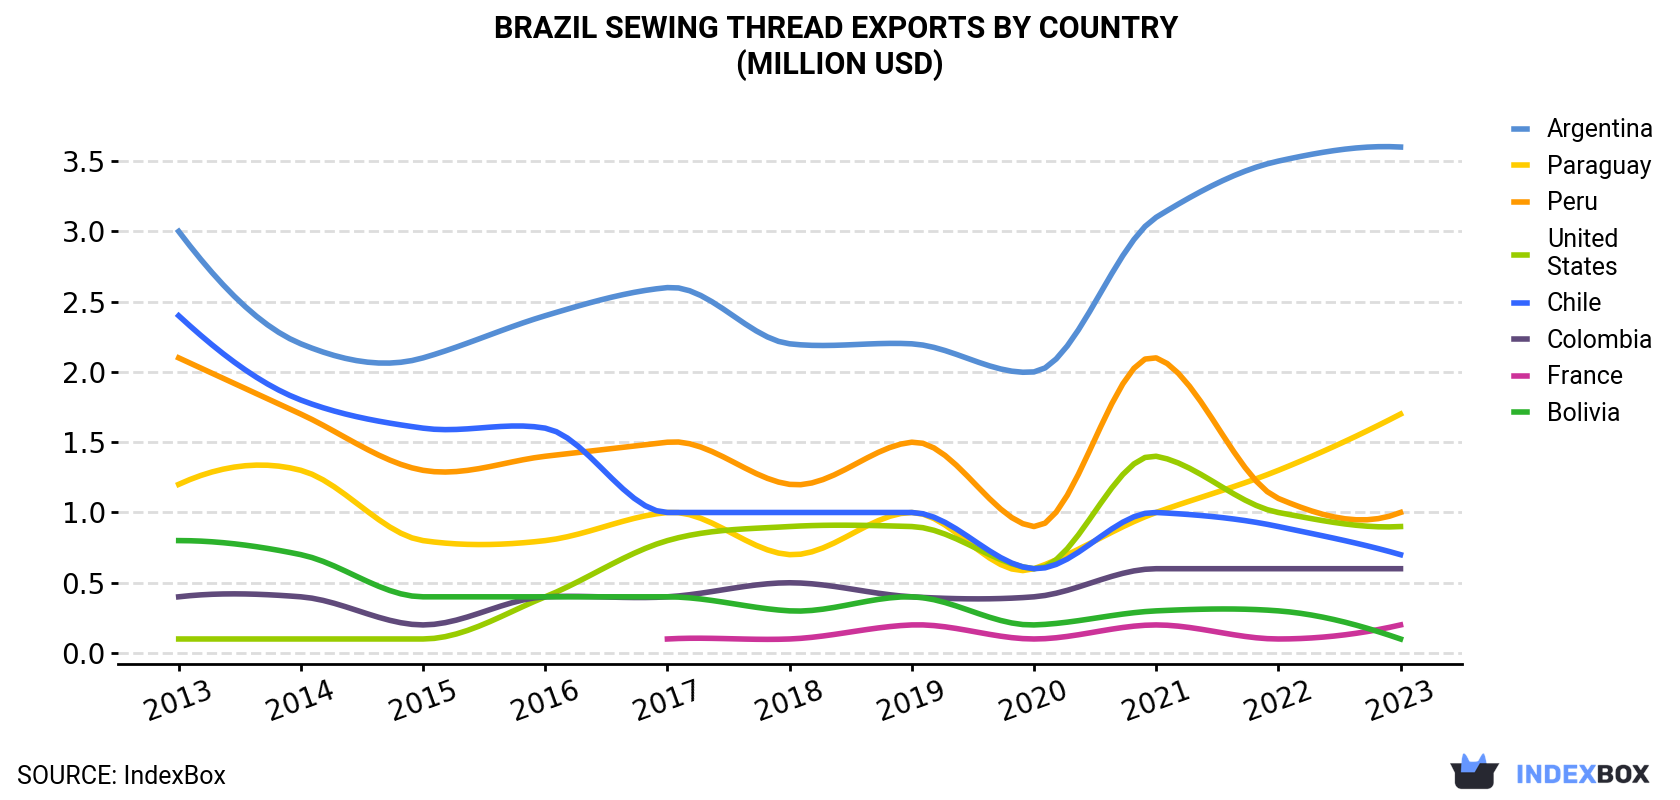 Brazil Sewing Thread Exports By Country (Million USD)